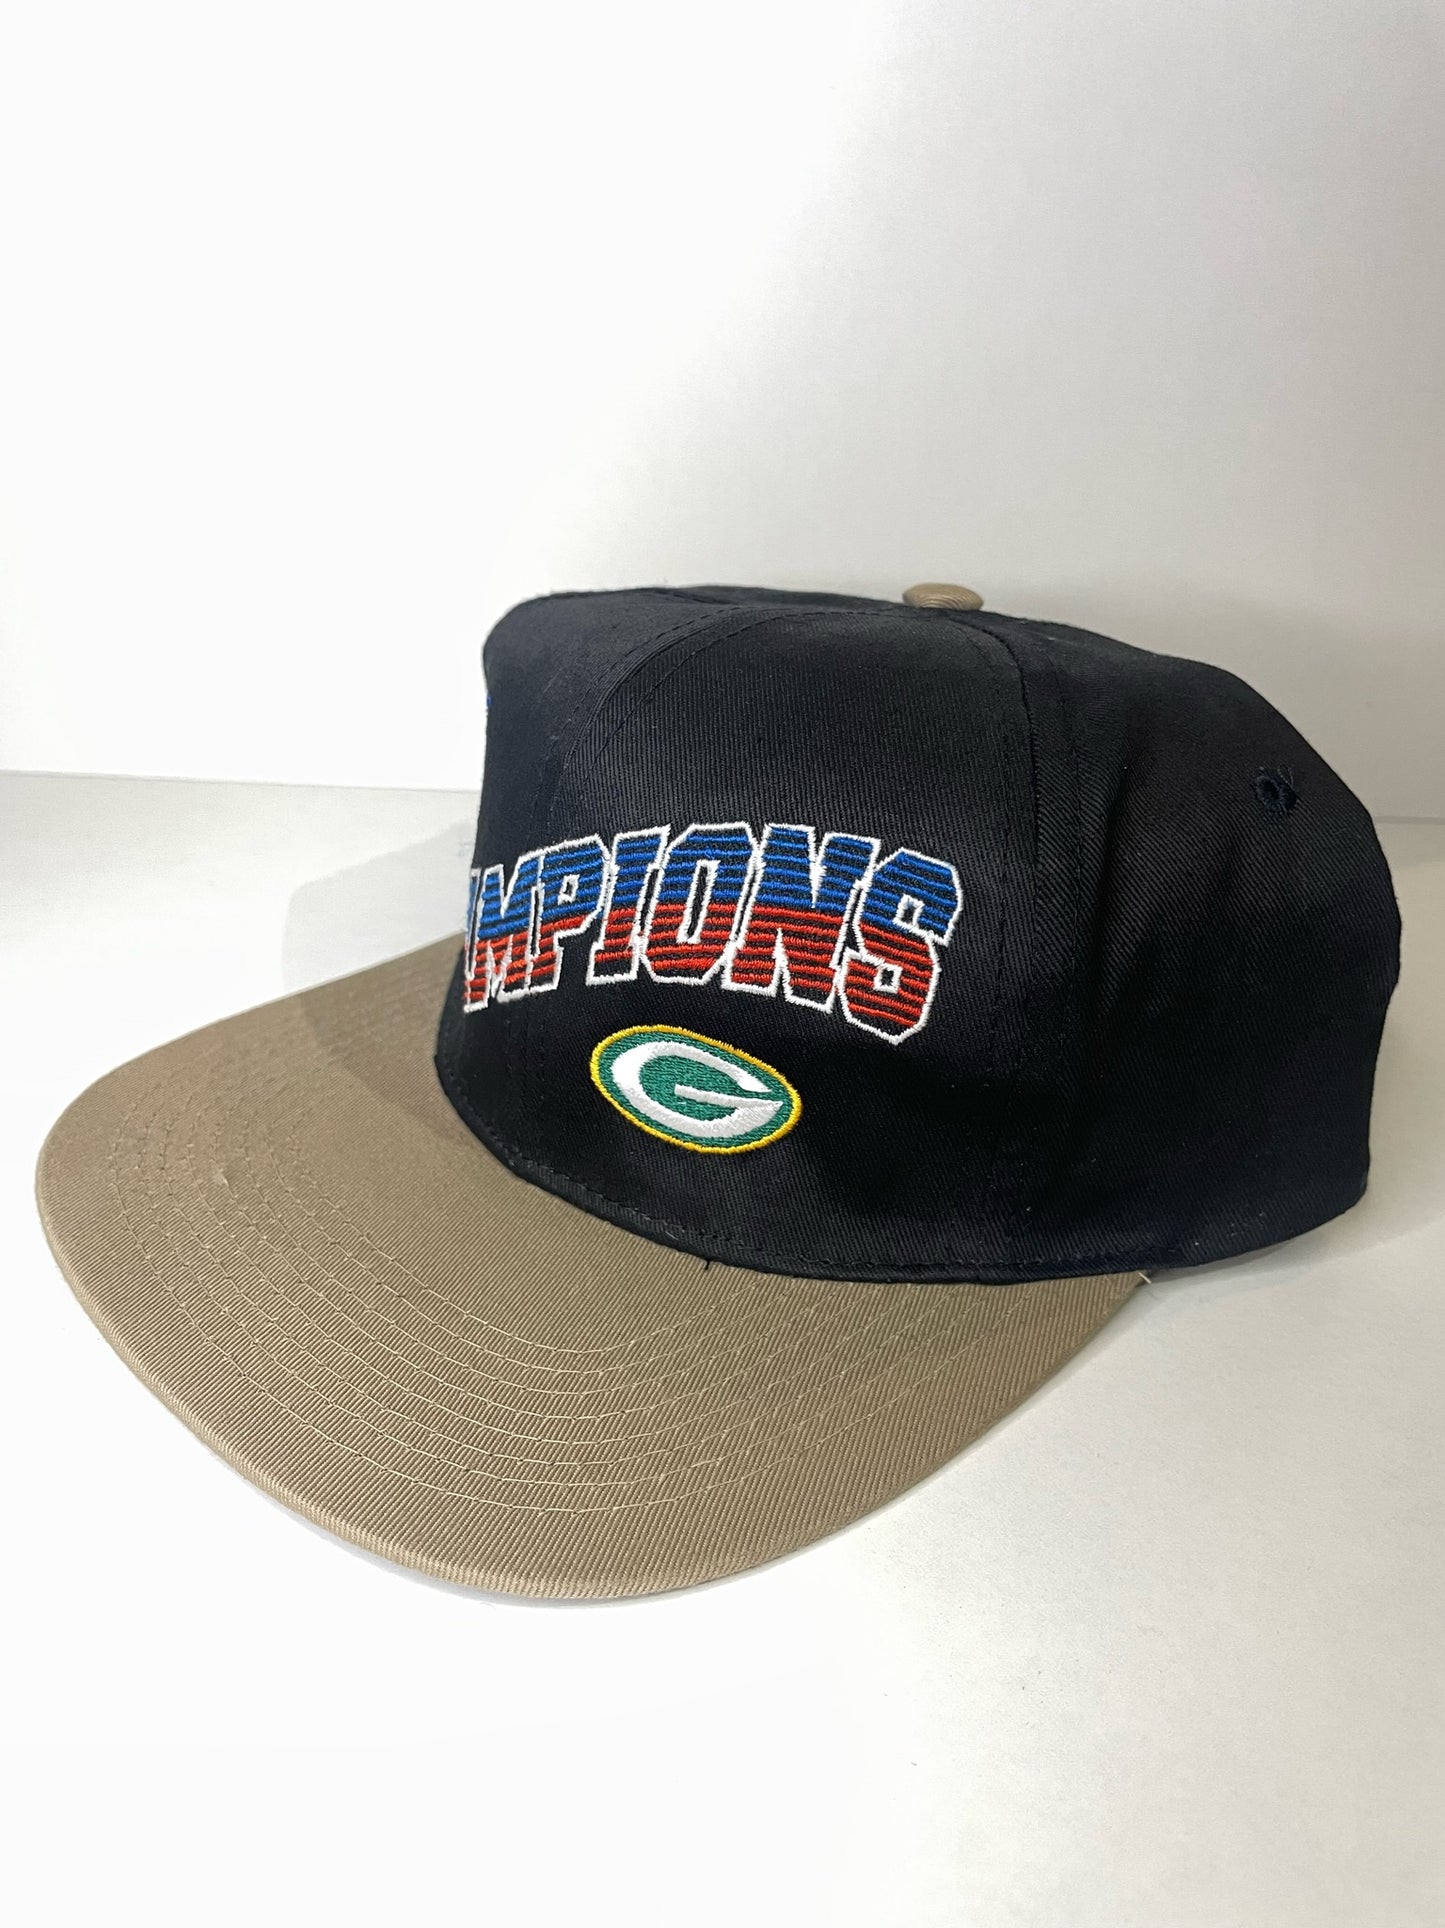 "DS" VINTAGE 90s GREEN BAY PACKERS GAME DAY SNAPBACK CAP HAT